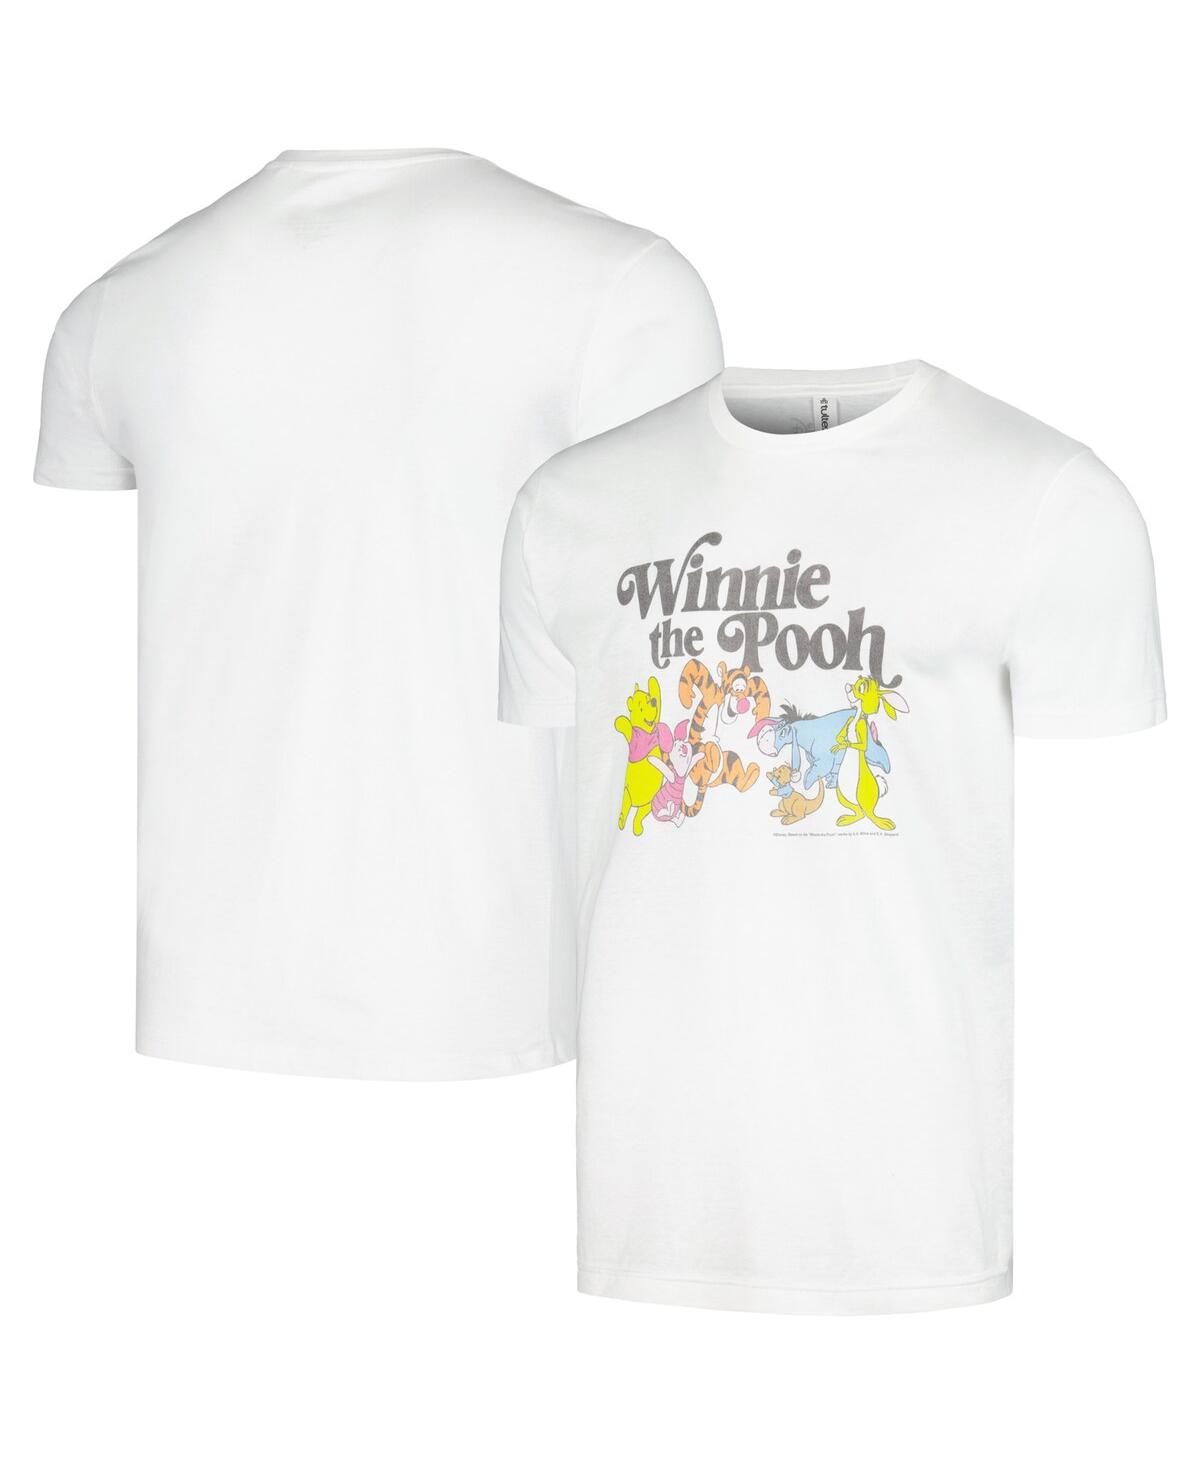 Men's and Women's Mad Engine White Winnie the Pooh Group T-shirt - White